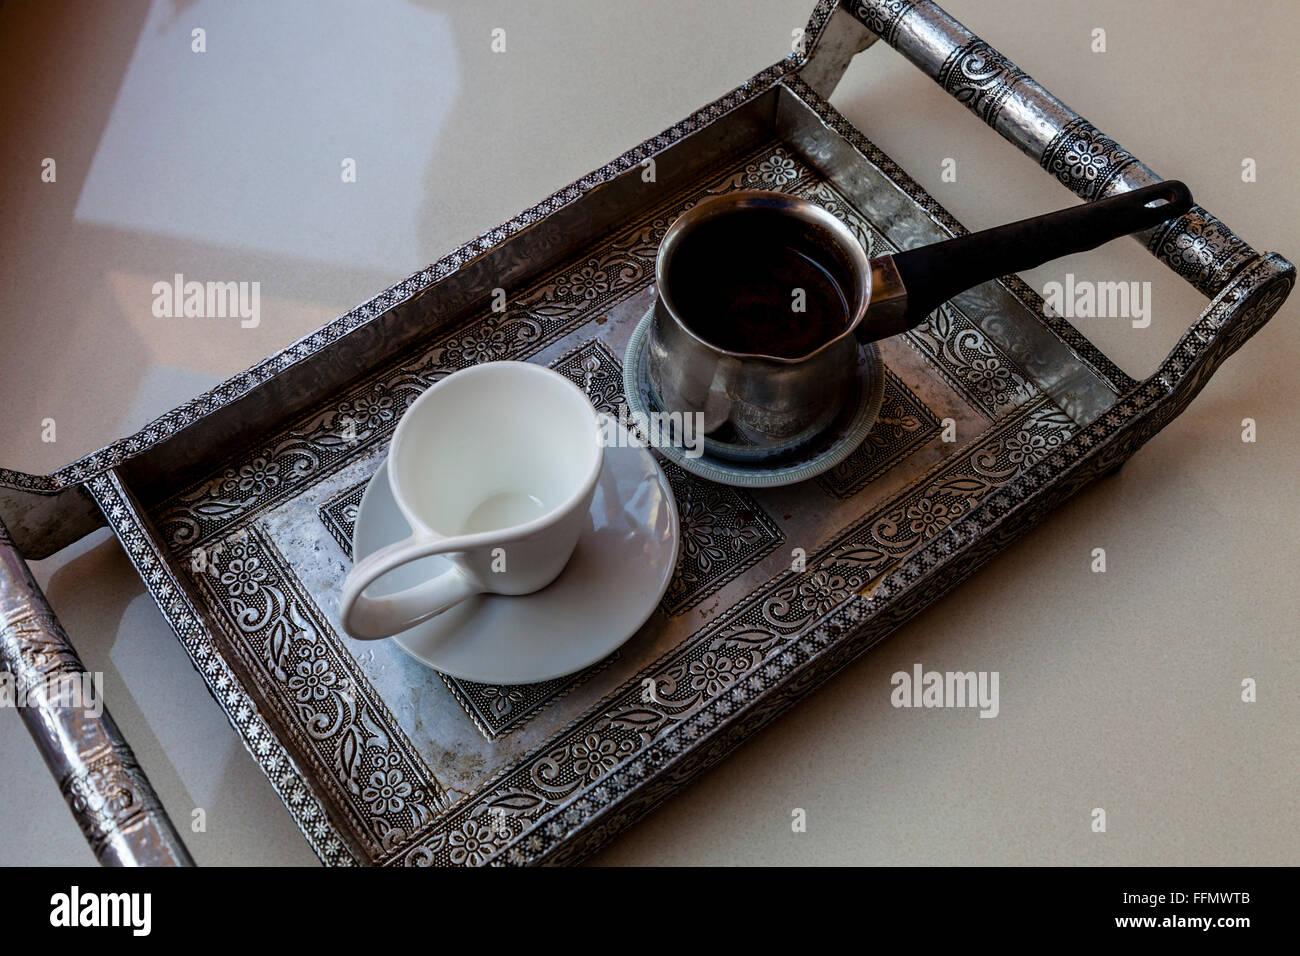 Coffee Served At An Omani Restaurant, Muscat, Sultanate Of Oman Stock Photo